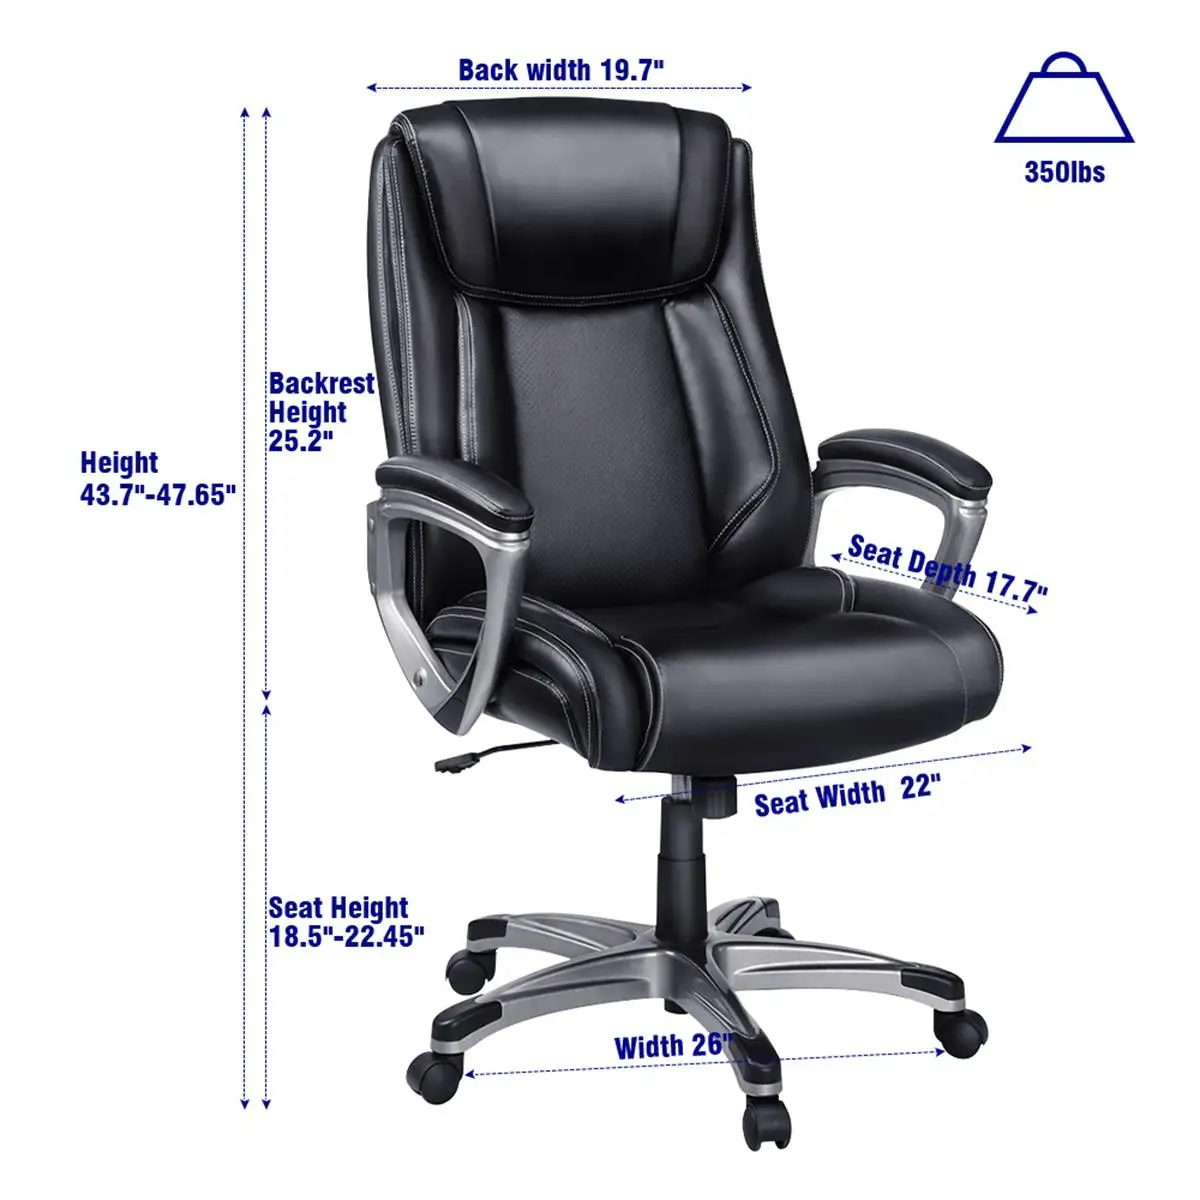 

High Quality Office Executive Chair Ergonomic Computer Game Chair Internet Armchair Chair Cafe Home Chair with Lift and Swivel